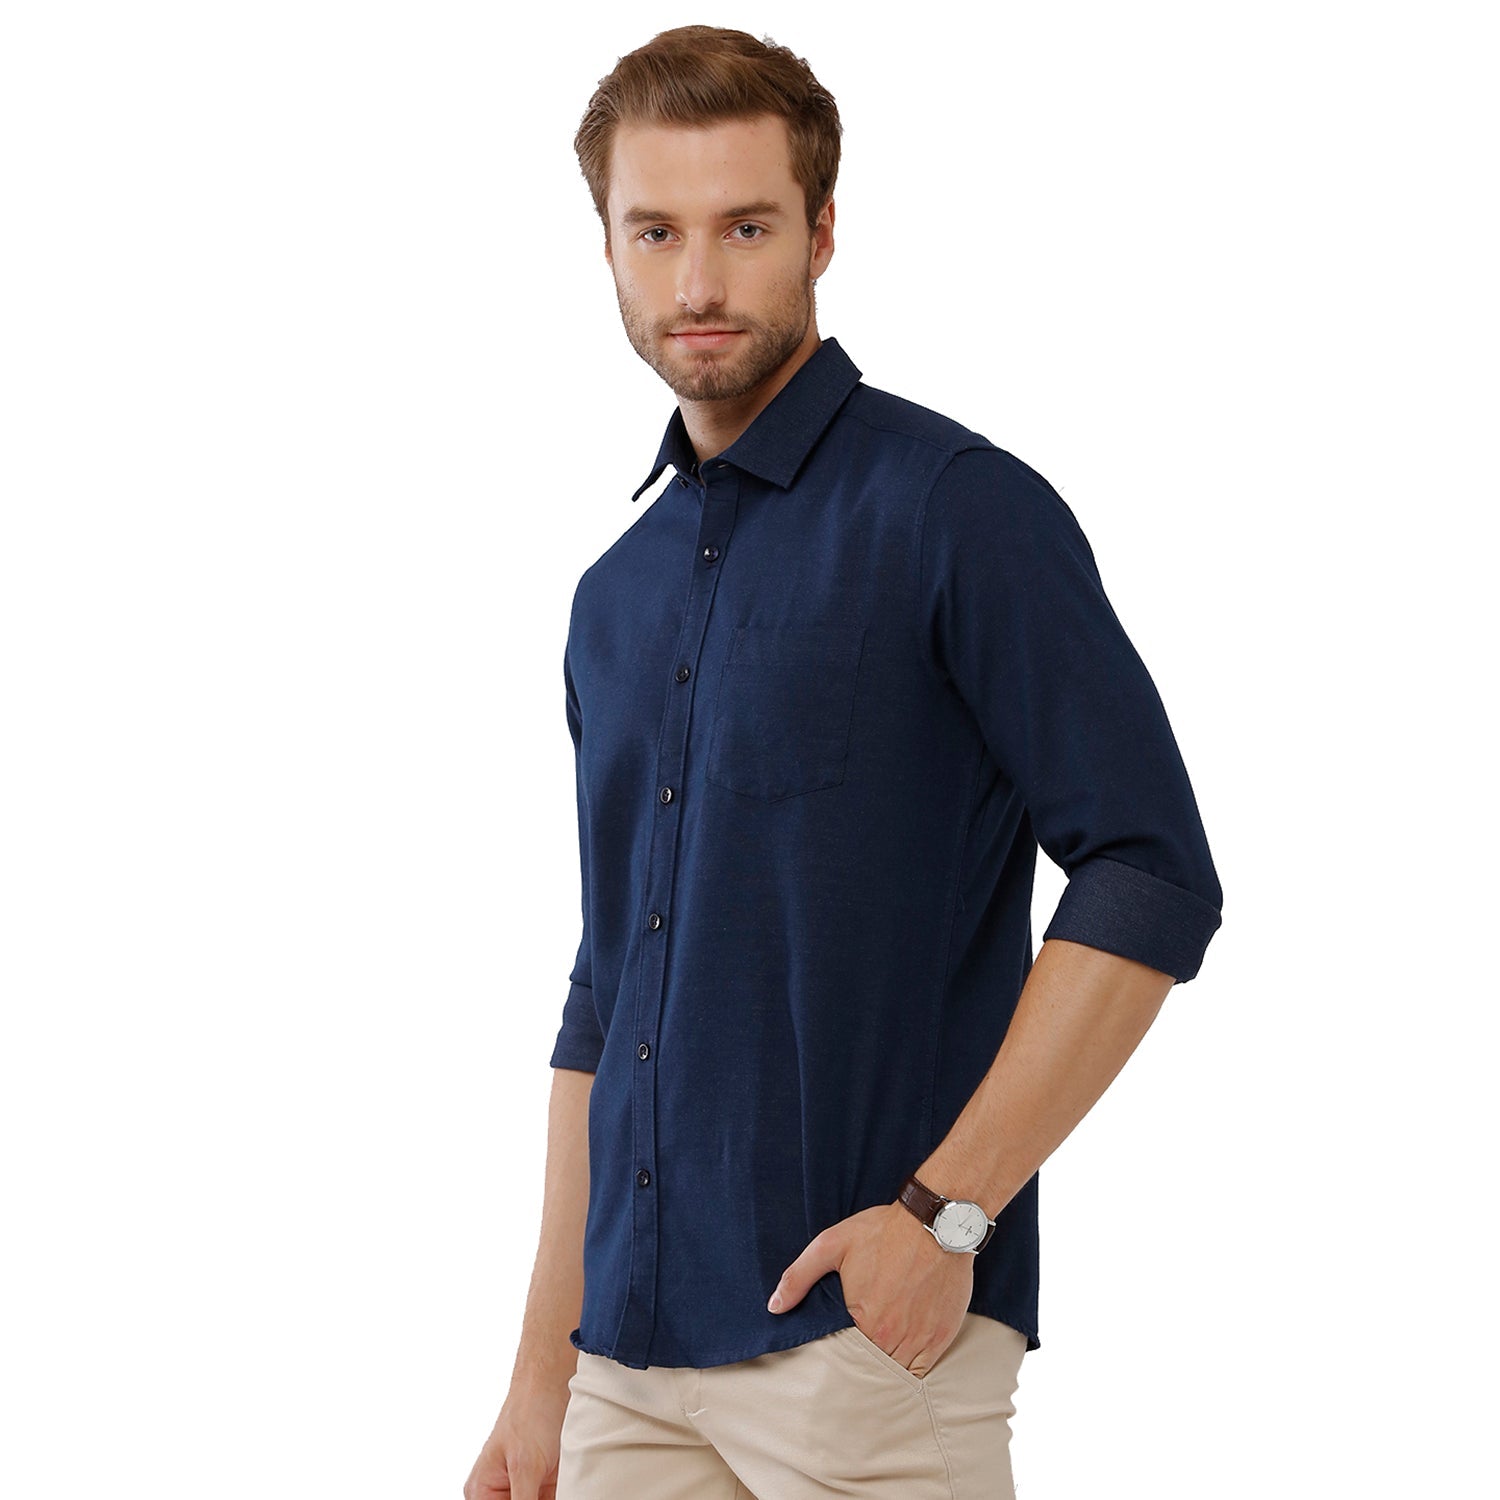 Classic Polo Mens 100% Cotton Solid Slim Fit Navy Color Woven Shirt - SN1 88 A Shirts Classic Polo 